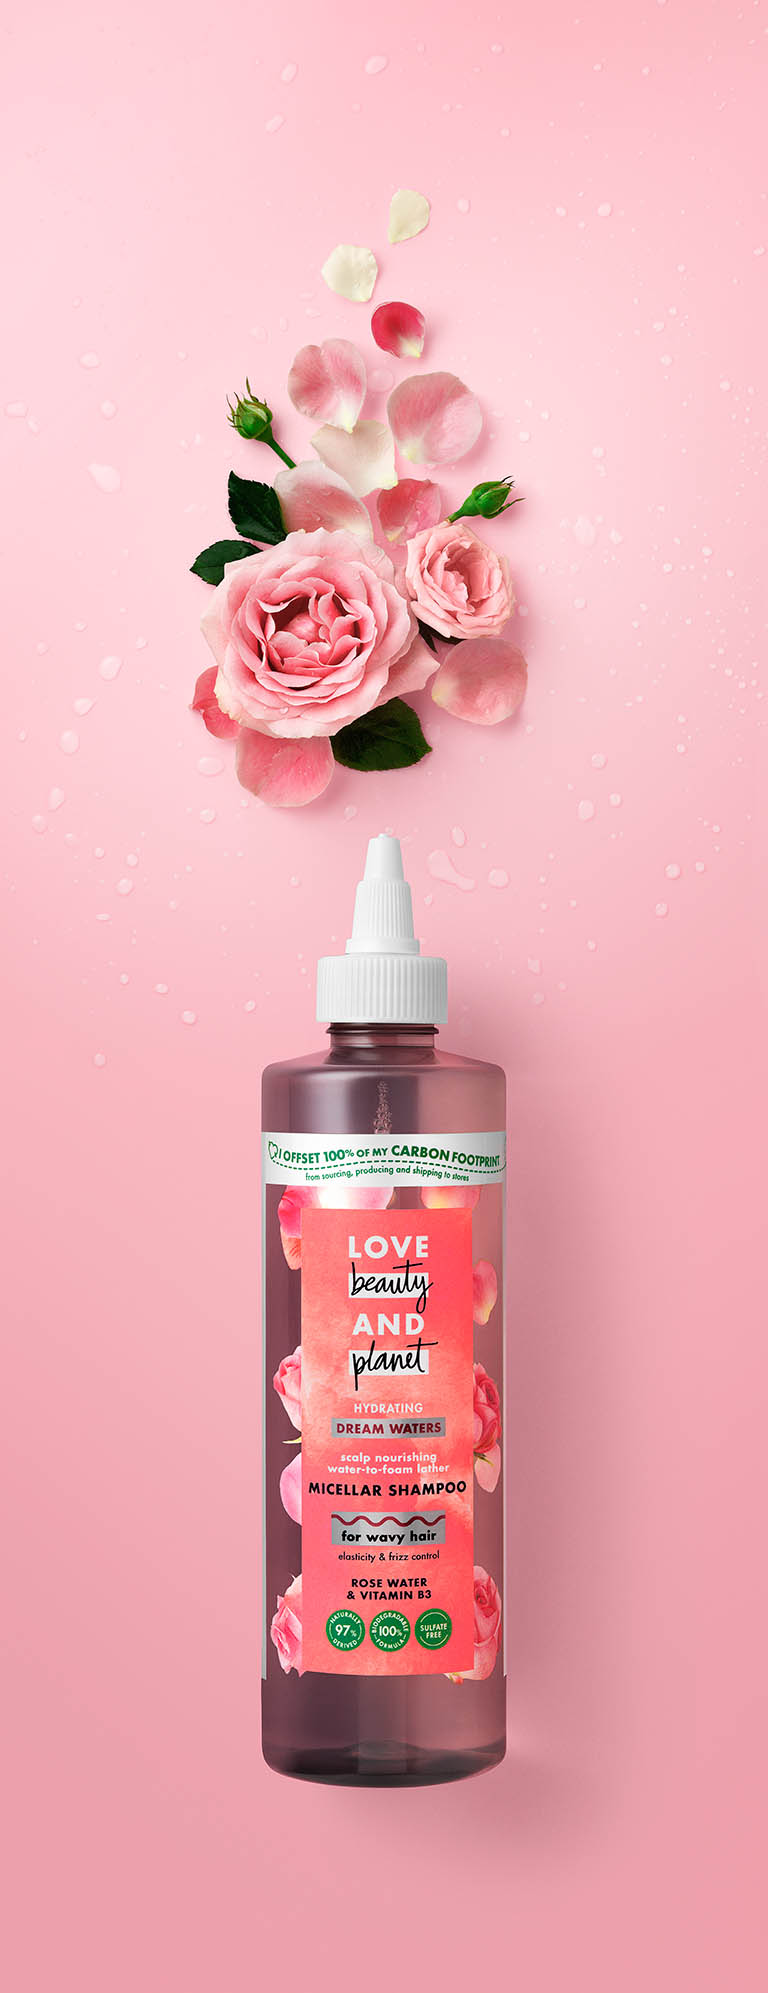 Packshot Factory - Coloured background - Love Beauty and Planet hair care shampoo with ingredients